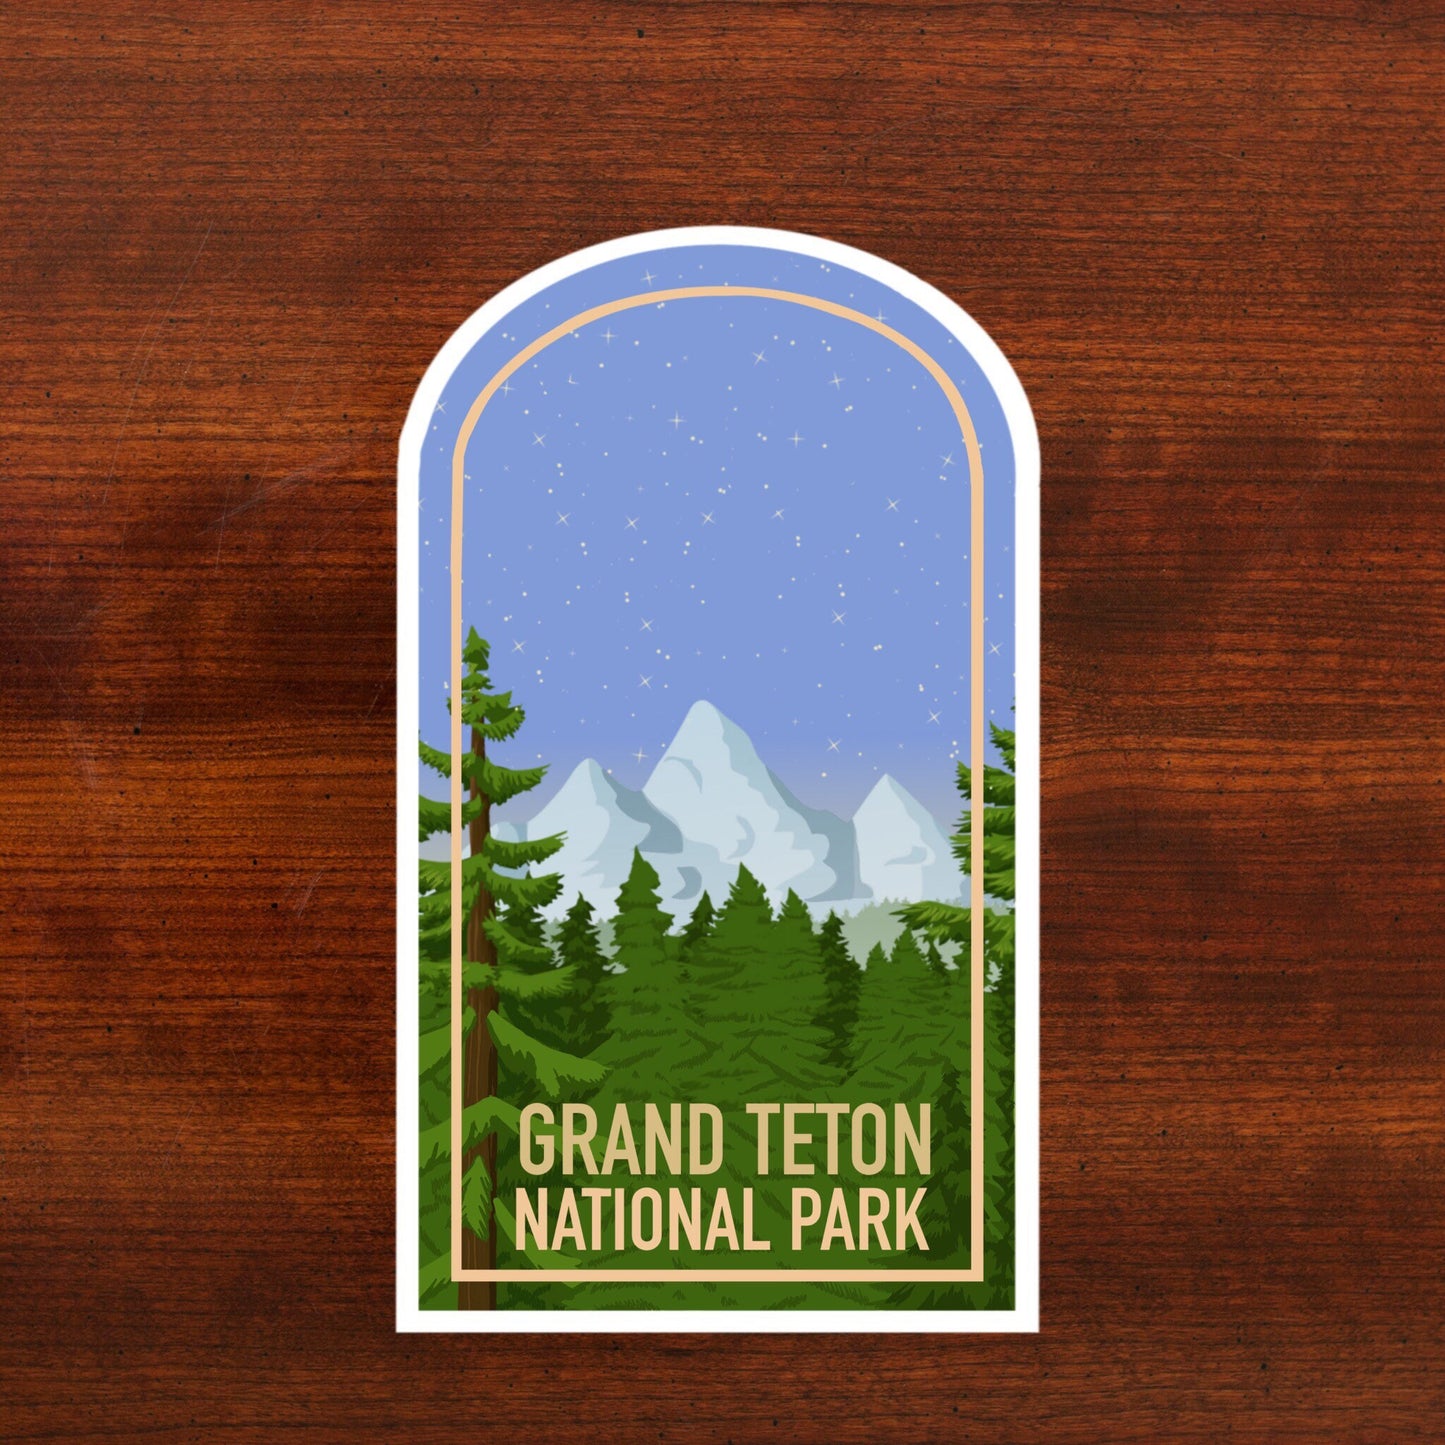 Grand Teton National Park stickers, National Parks stickers, 3x3in. Vinyl stickers perfect for Water Bottles, Bullet Journals, Laptops, etc.